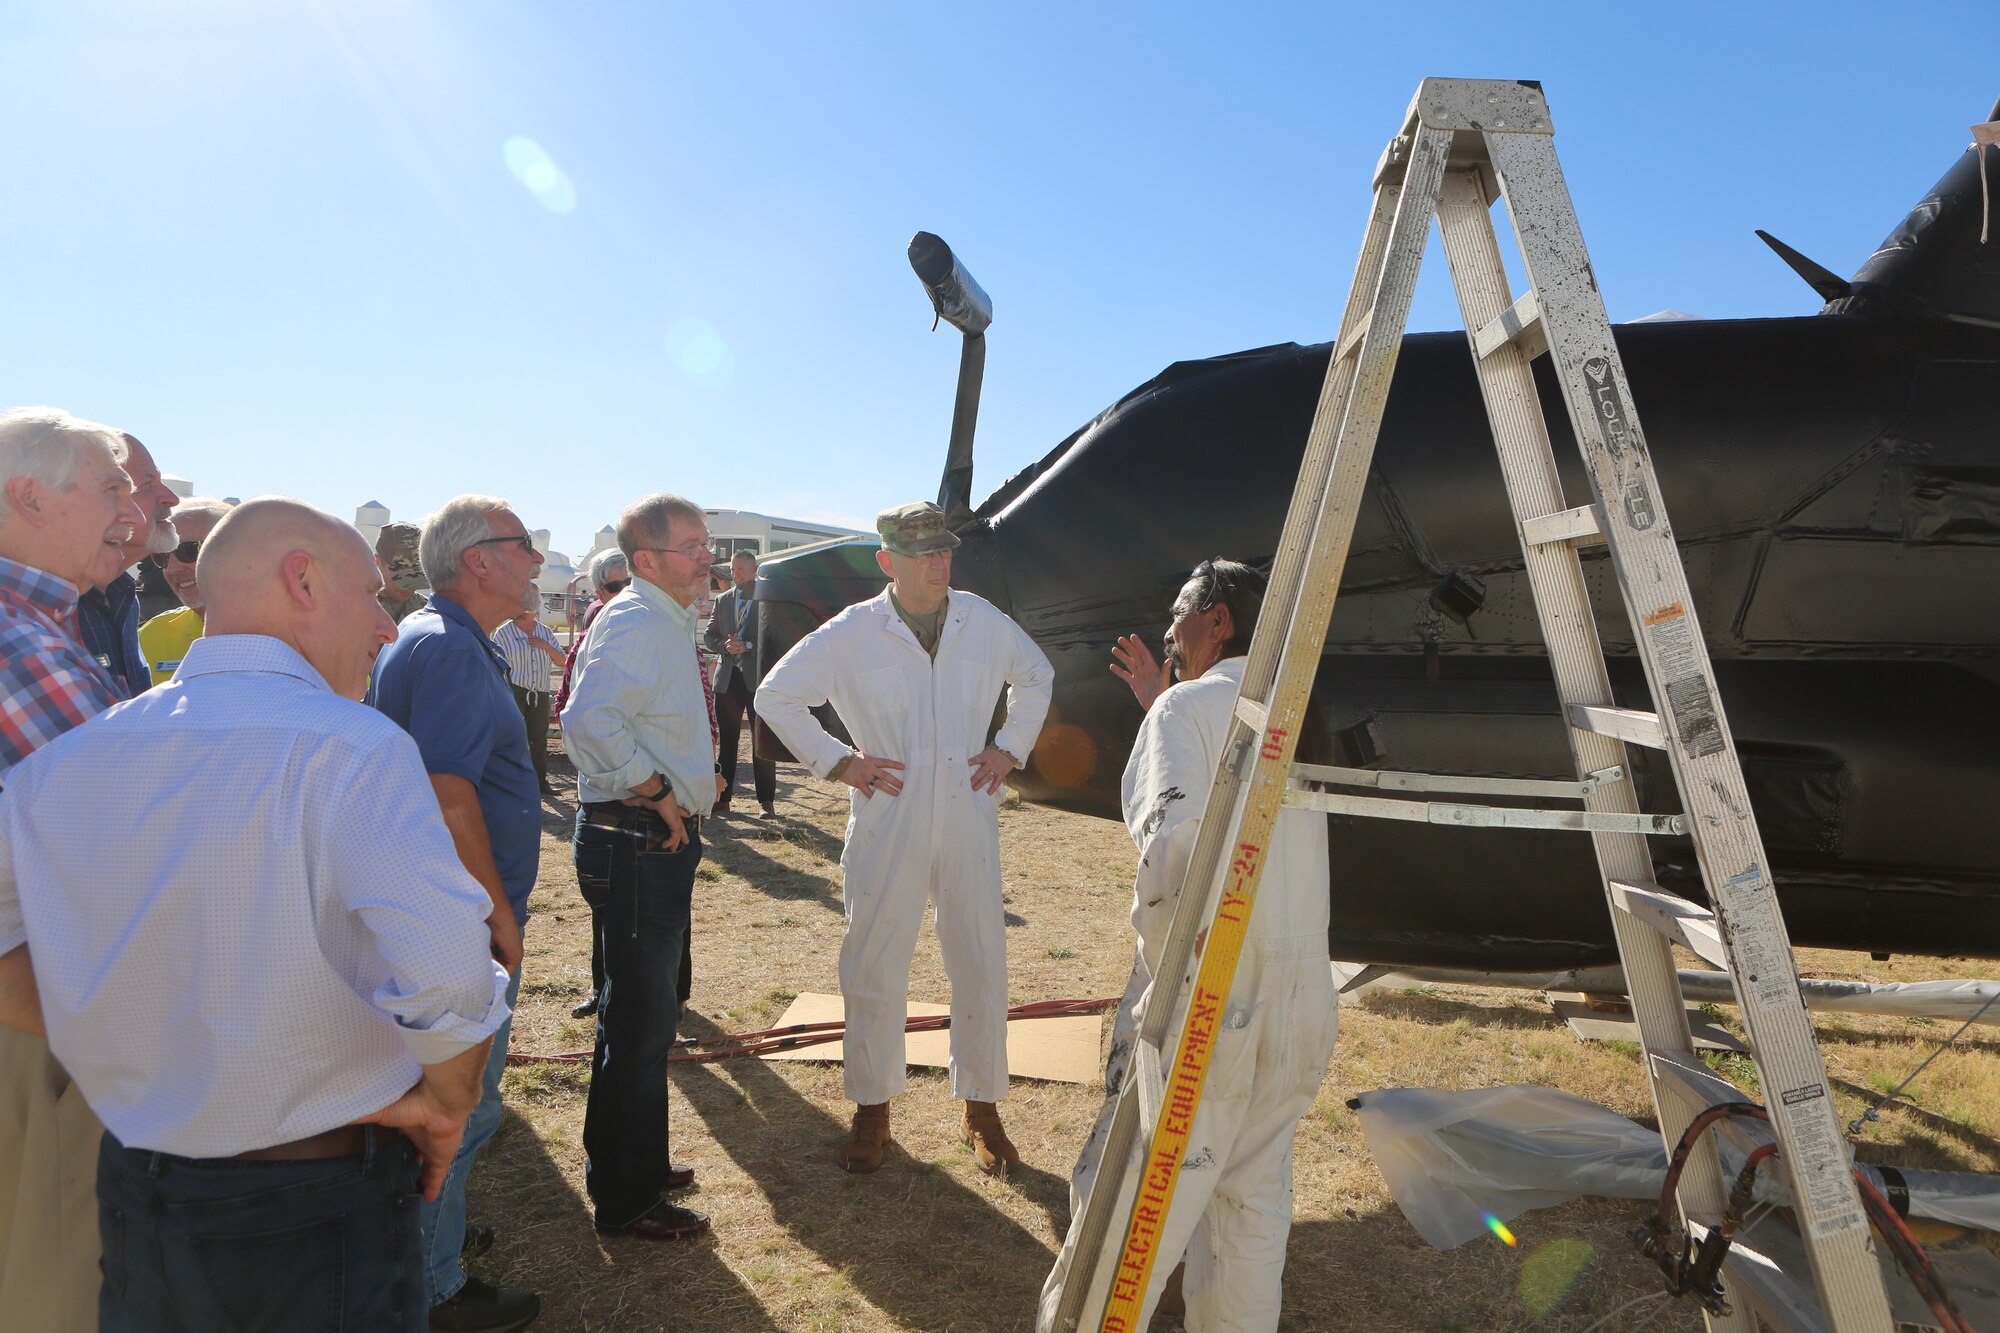 U.S. Air Force Gen. Duke Z. Richardson (white suit, center), commander of Air Force Materiel Command, and AFMC Civic Leaders listen on how aircrafts are preserved in the desert storage.